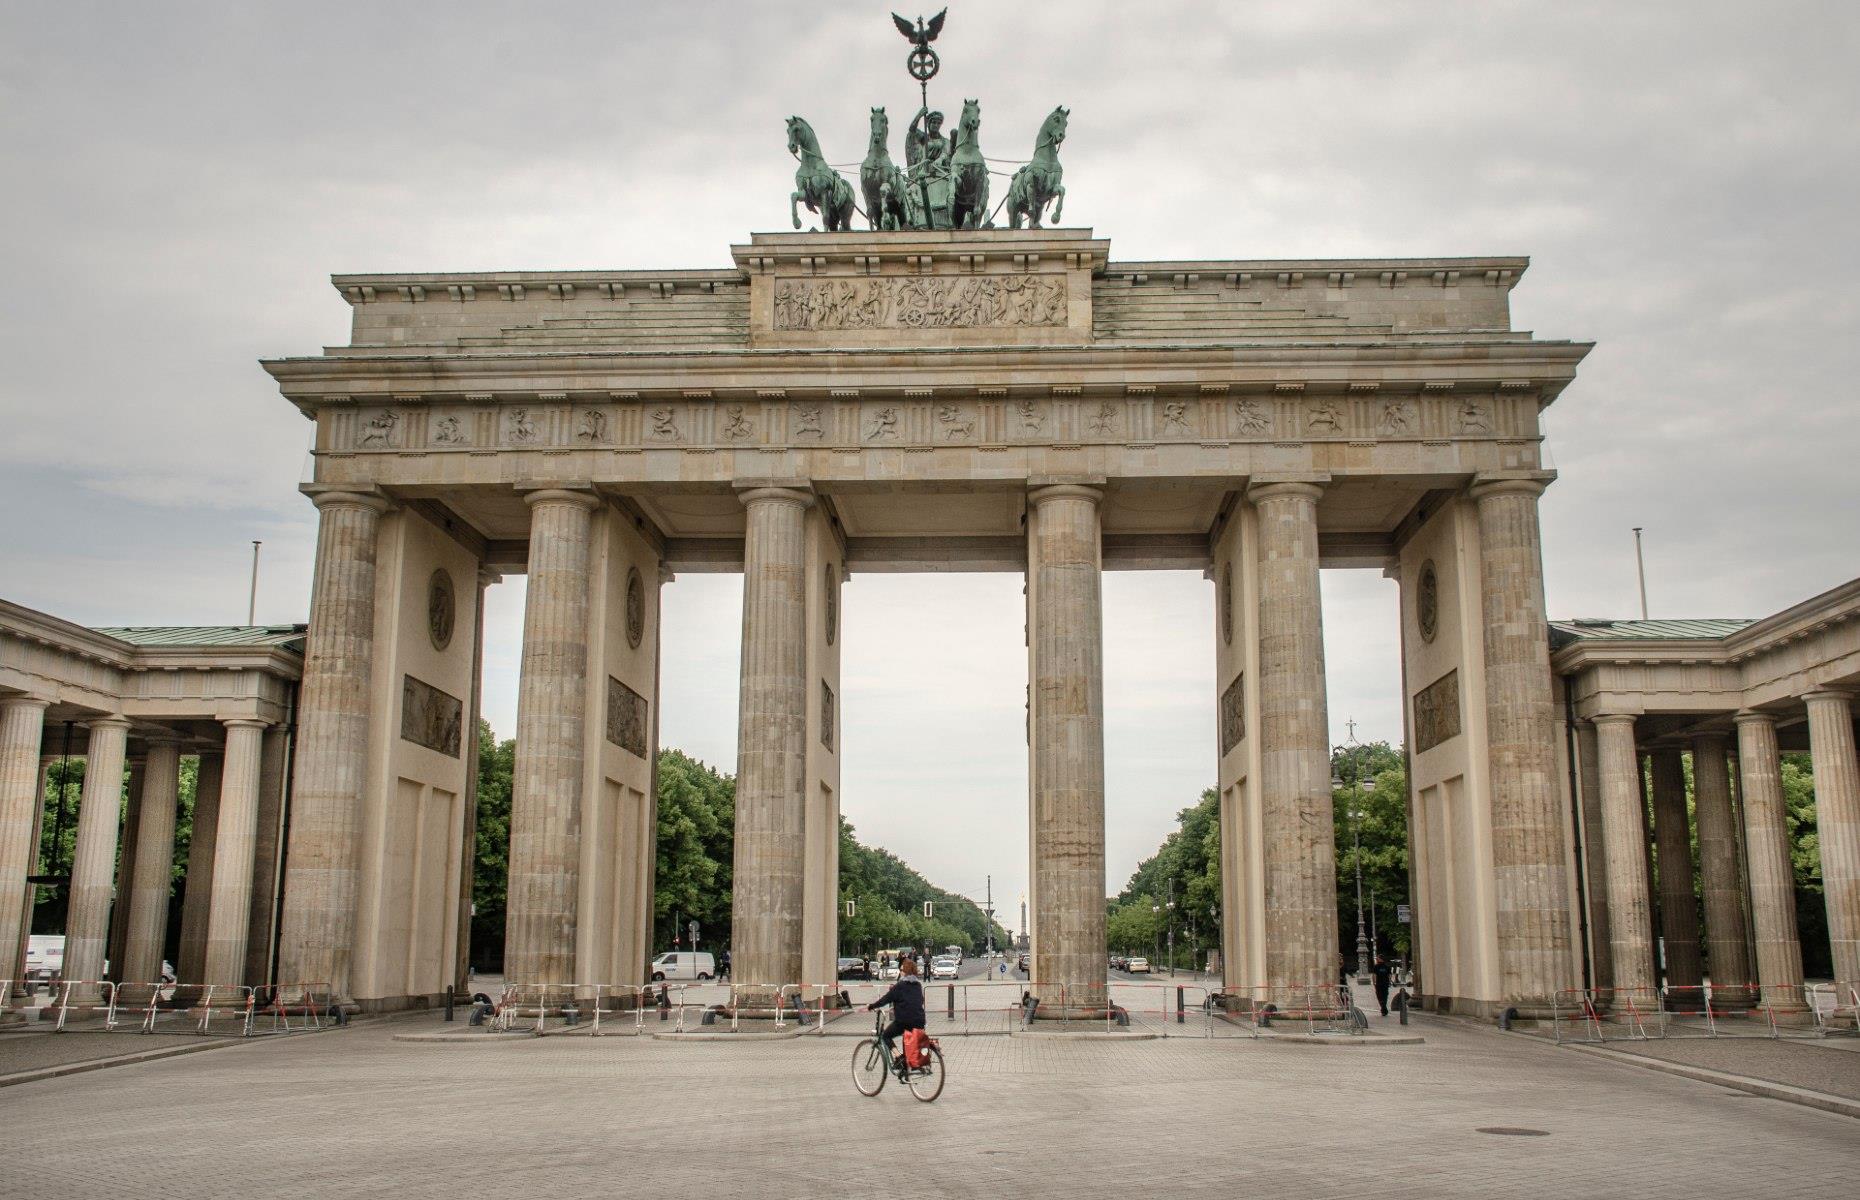 <p>One of the few significant landmarks in Berlin to survive the Second World War, the gate has come to symbolize the division between the East and West – and subsequent unity. In 1961, when the Berlin Wall went up, the gateway was enclosed in an exclusion zone meaning people couldn’t see it. Since Berlin was reunified in 1989, it’s become one of the city’s most popular attractions.</p>  <p><a href="https://www.loveexploring.com/galleries/110336/then-and-now-how-city-skylines-have-changed-over-time?page=1"><strong>Then and now: how city skylines have changed over time</strong></a></p>